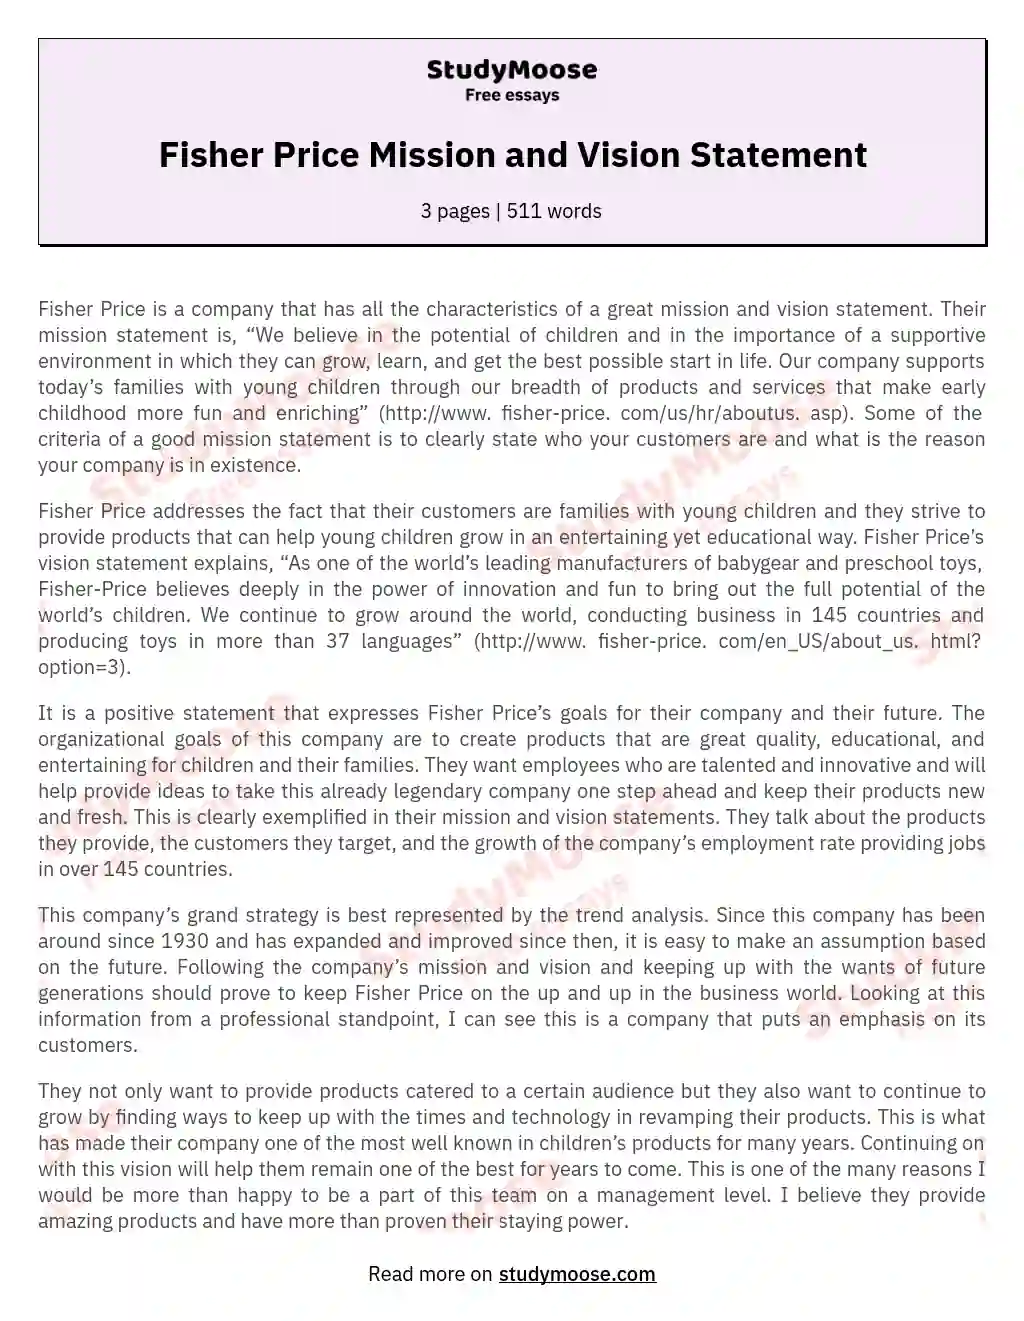 Fisher Price Mission and Vision Statement essay